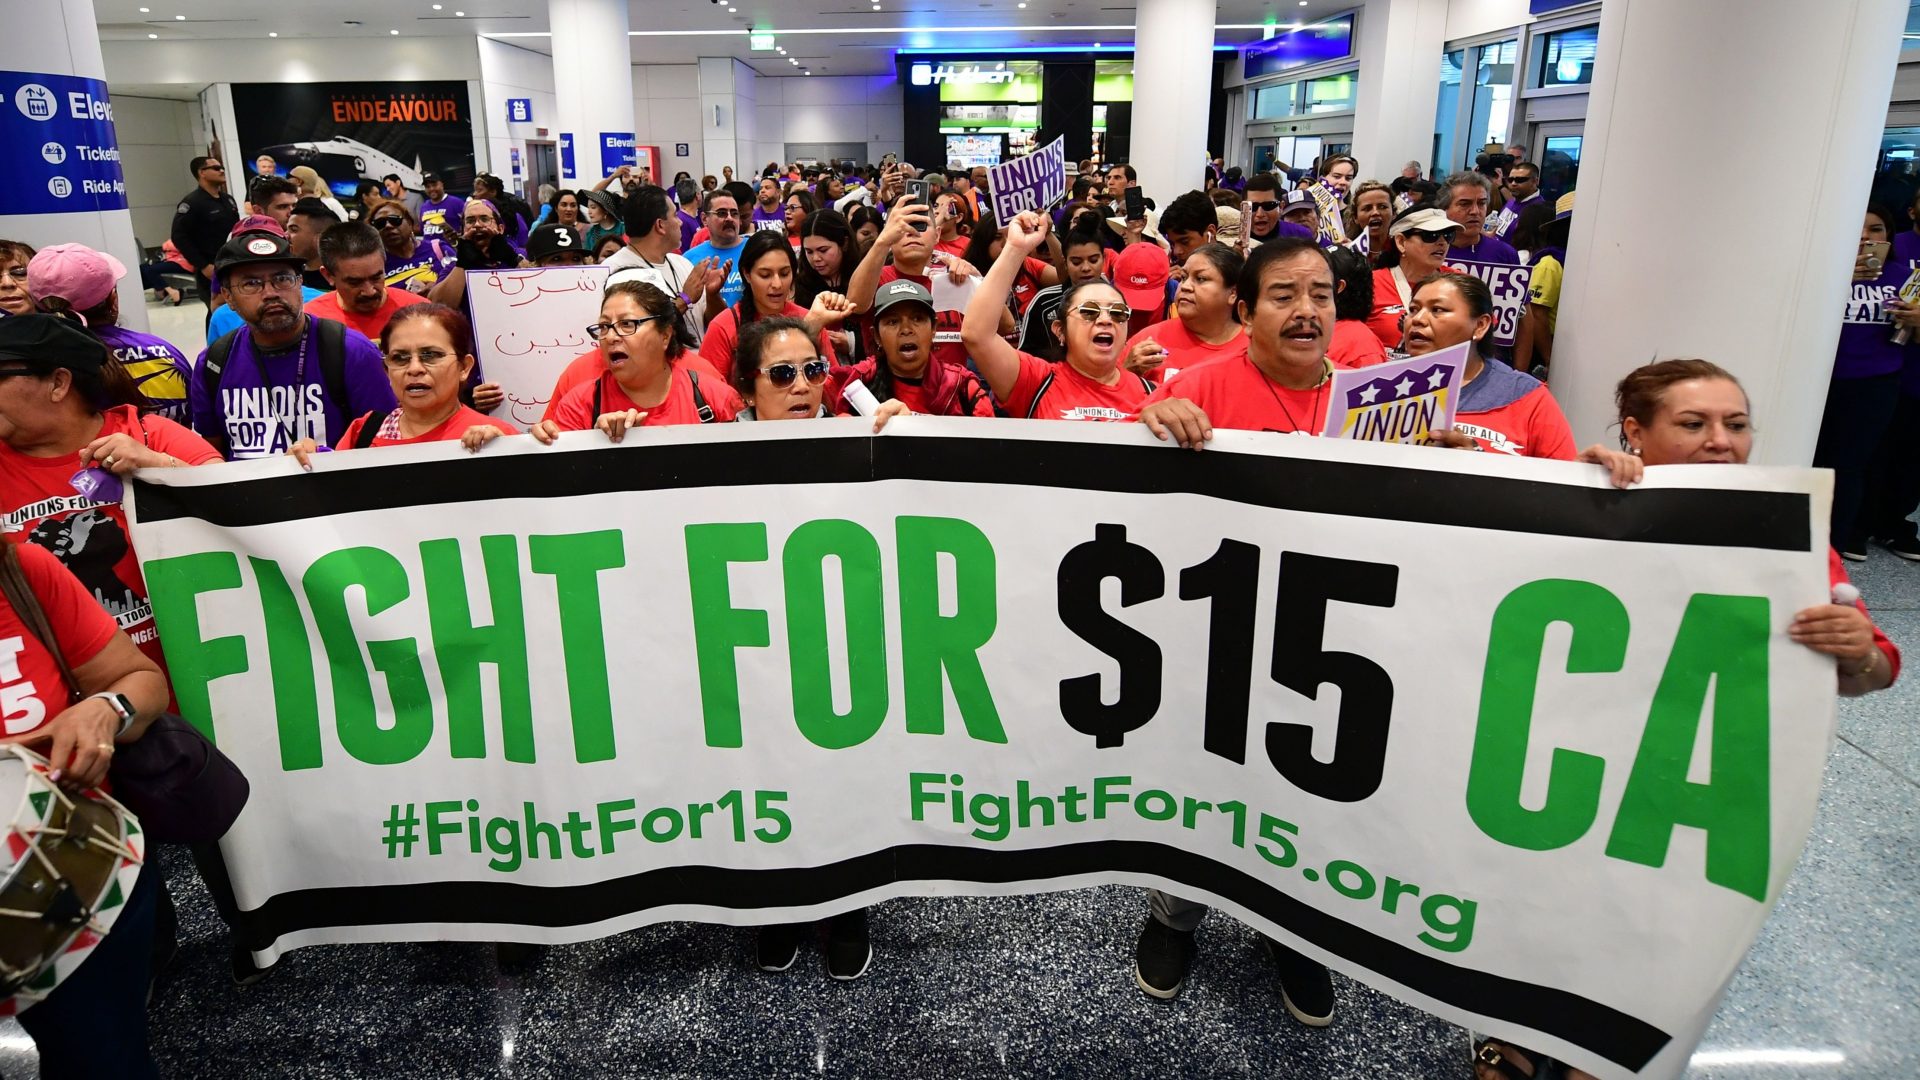 Airport employees, Uber and Lyft drivers, and other workers protest for a $15 minimum wage at Los Angeles International Airport in October. Increases in minimum wages contributed to bigger pay gains for lower-income workers.